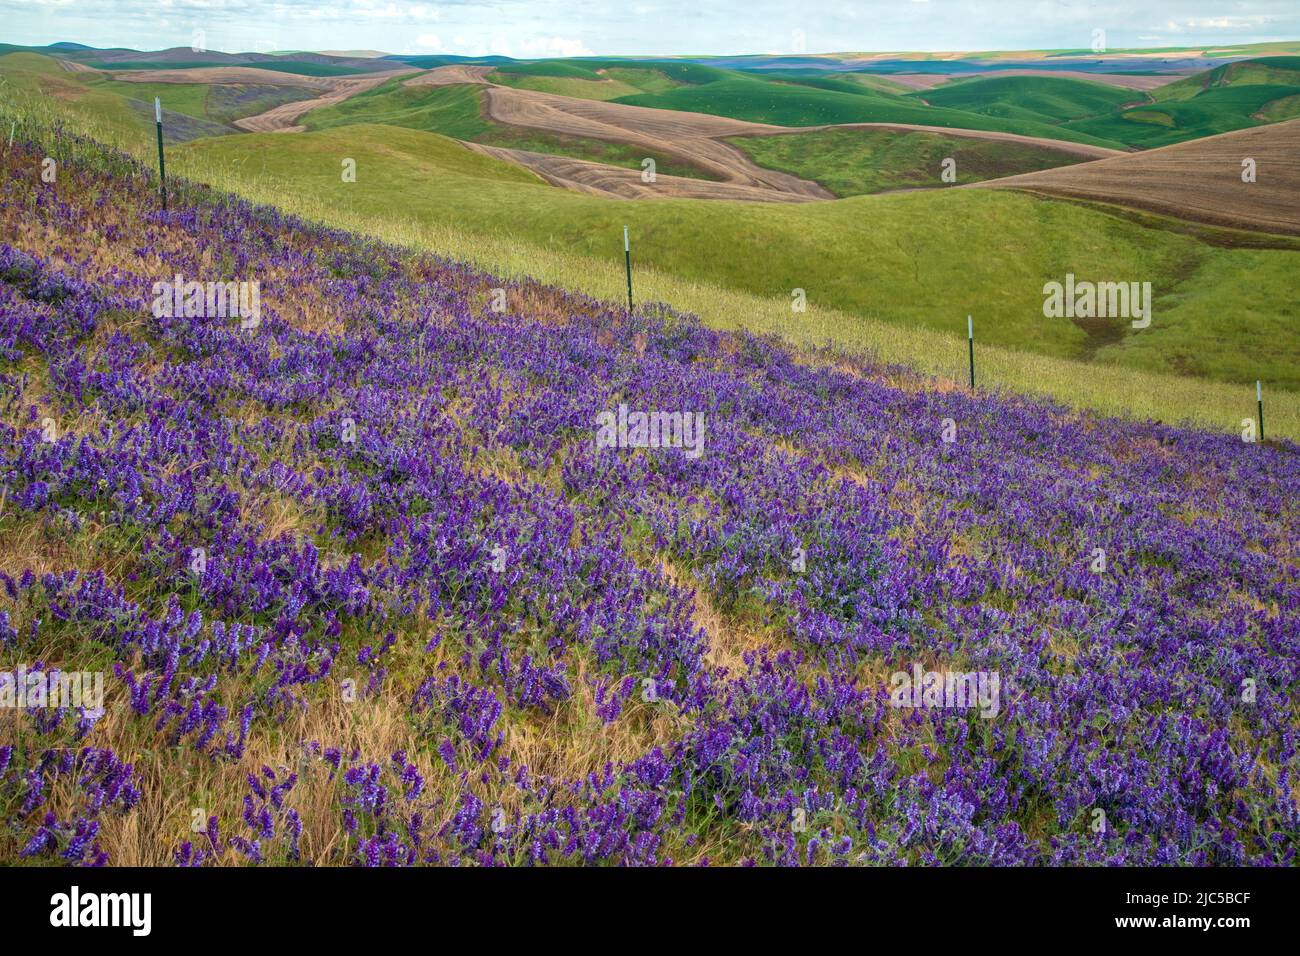 USA, Oregon,Wasco County, The Dalles, outback *** Local Caption ***  USA, Oregon, Wasco County, The Dalles, outback, bloom, landscape, wildflowers, in Stock Photo